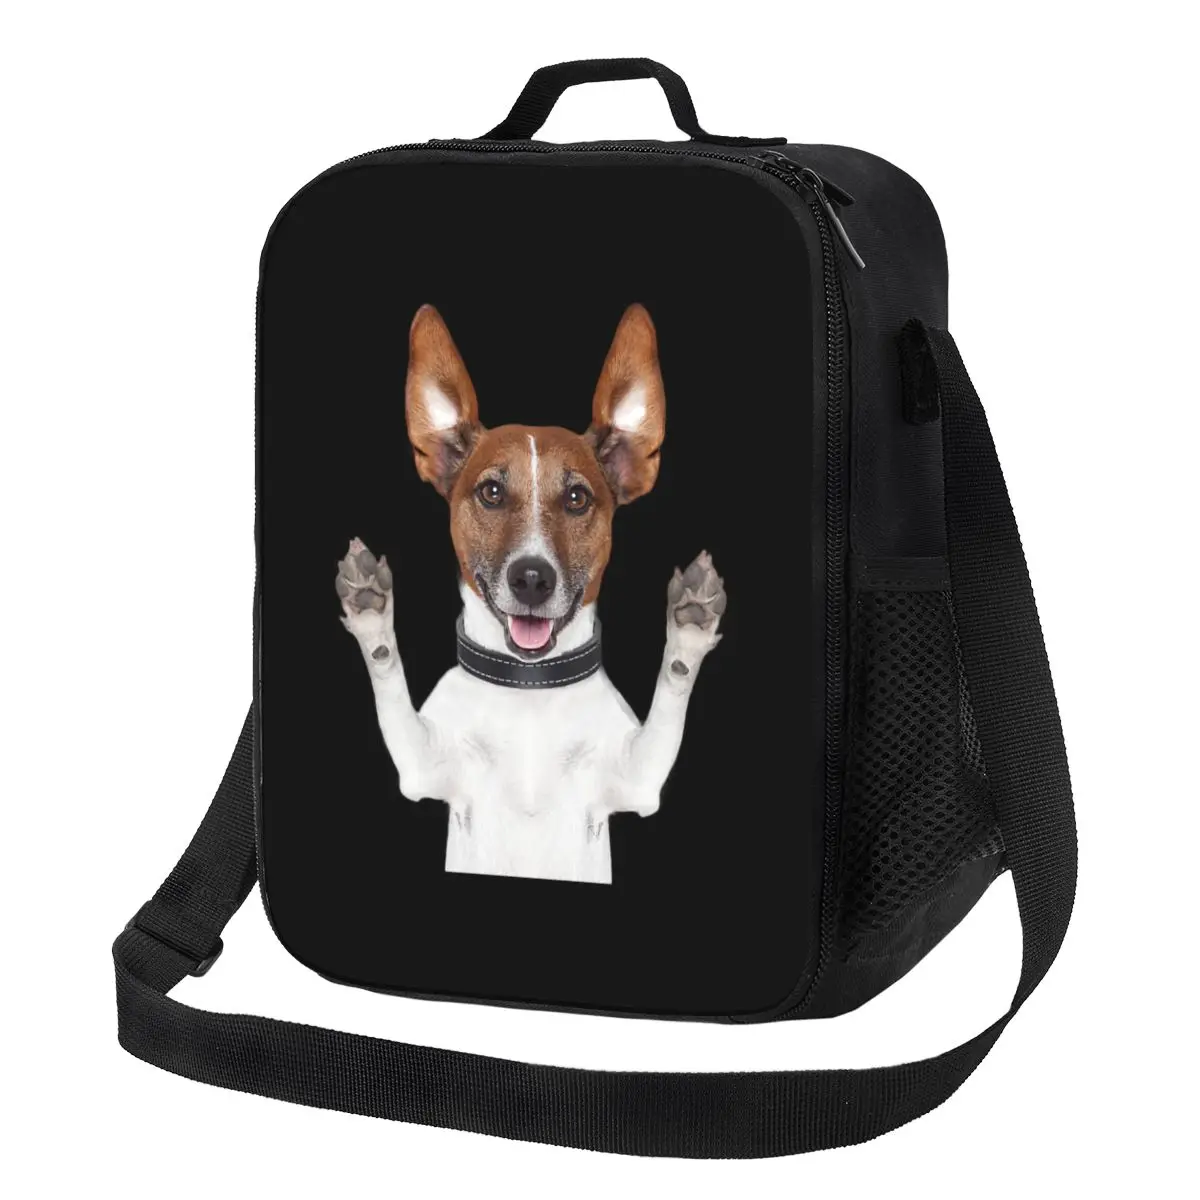 

Funny Dog Jack Russell Terrier Meme Portable Lunch Boxes Waterproof Pet Lover Thermal Cooler Food Insulated Lunch Bag Office